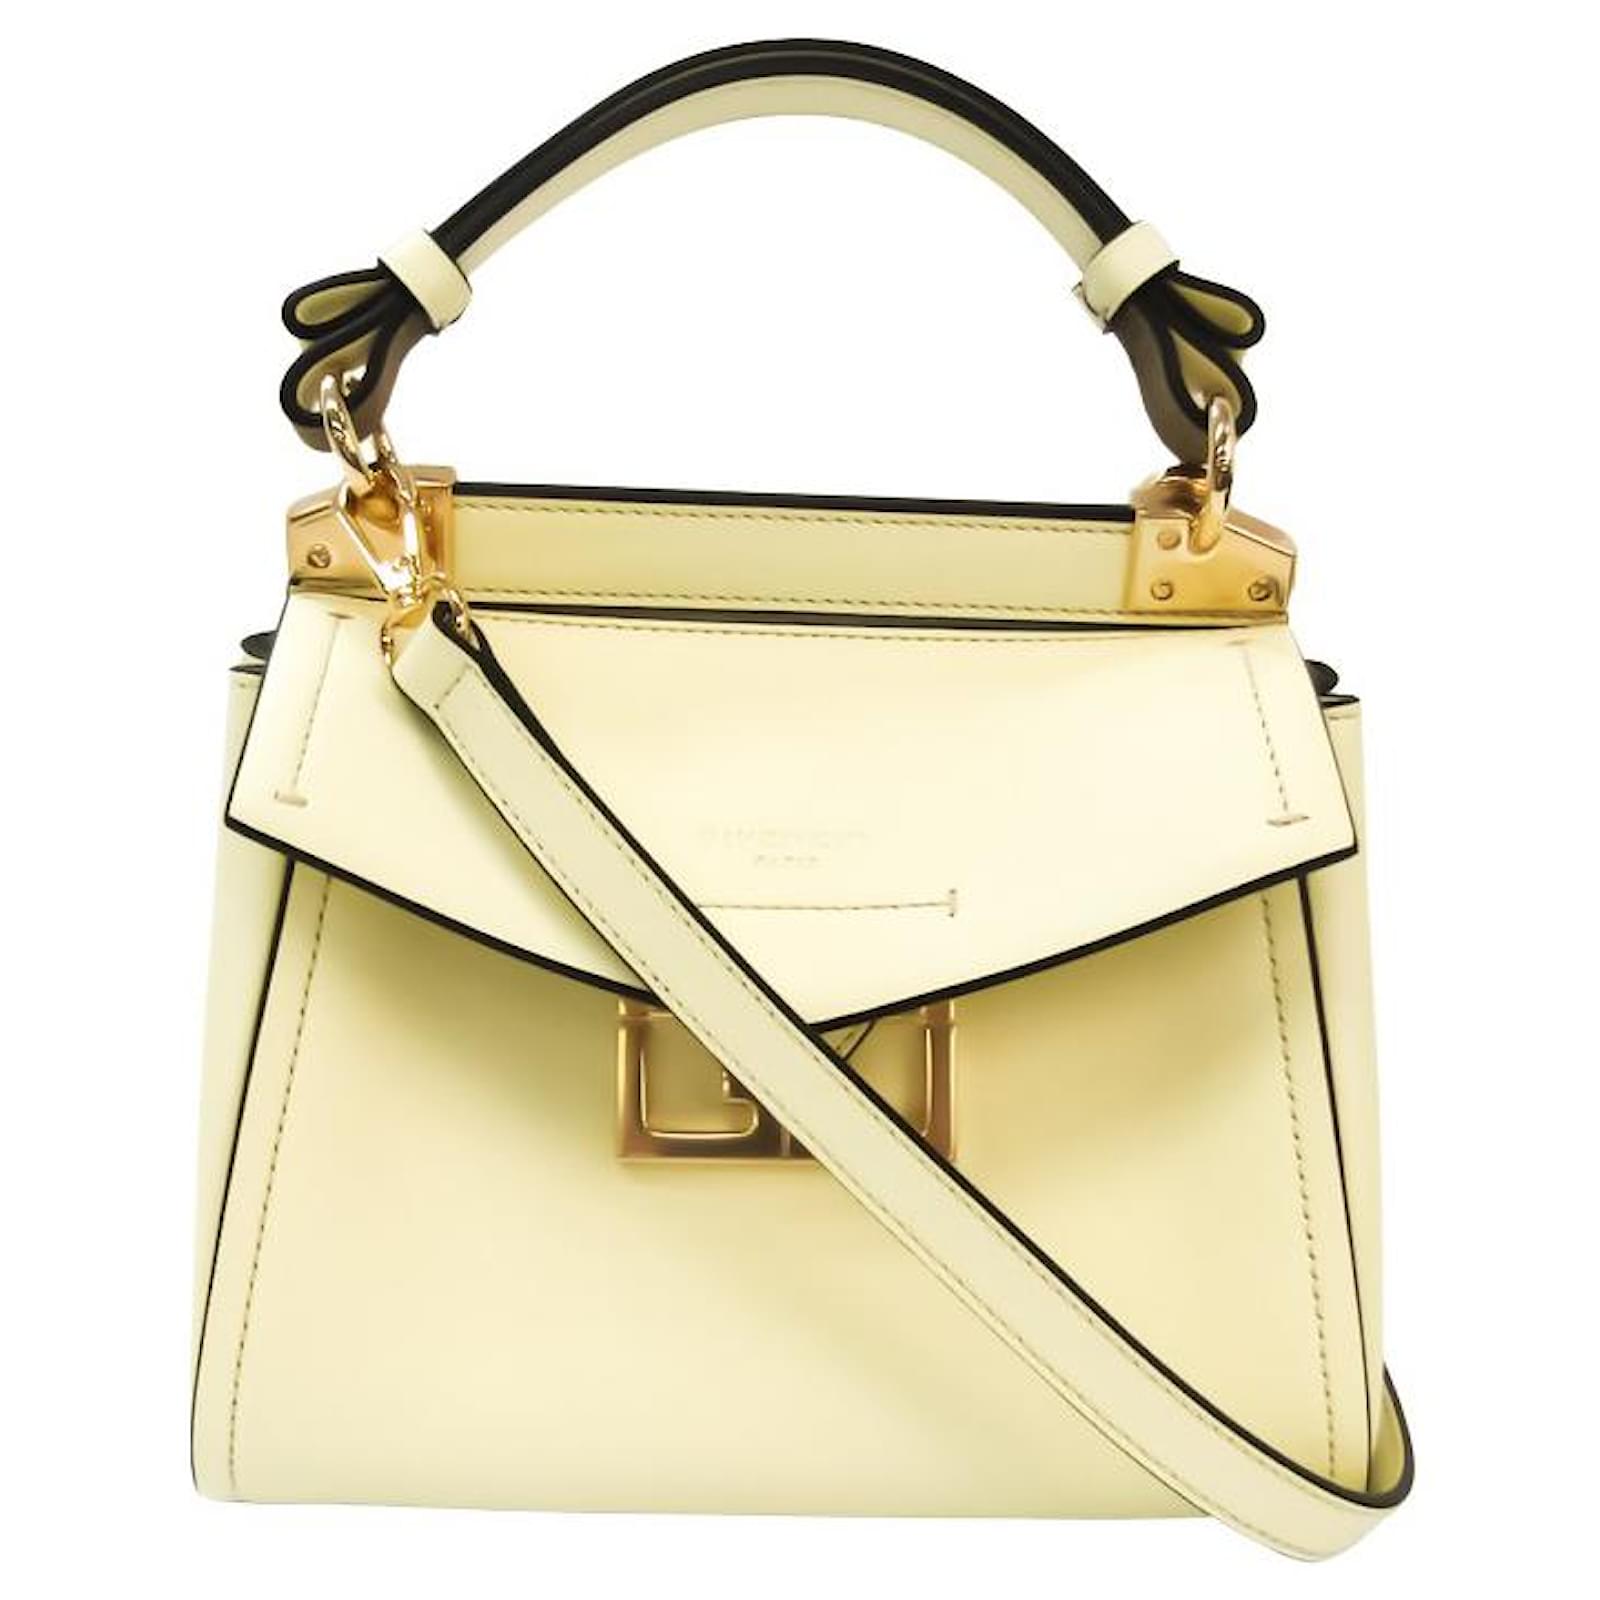 Givenchy Women's Going Out Bag - Cream